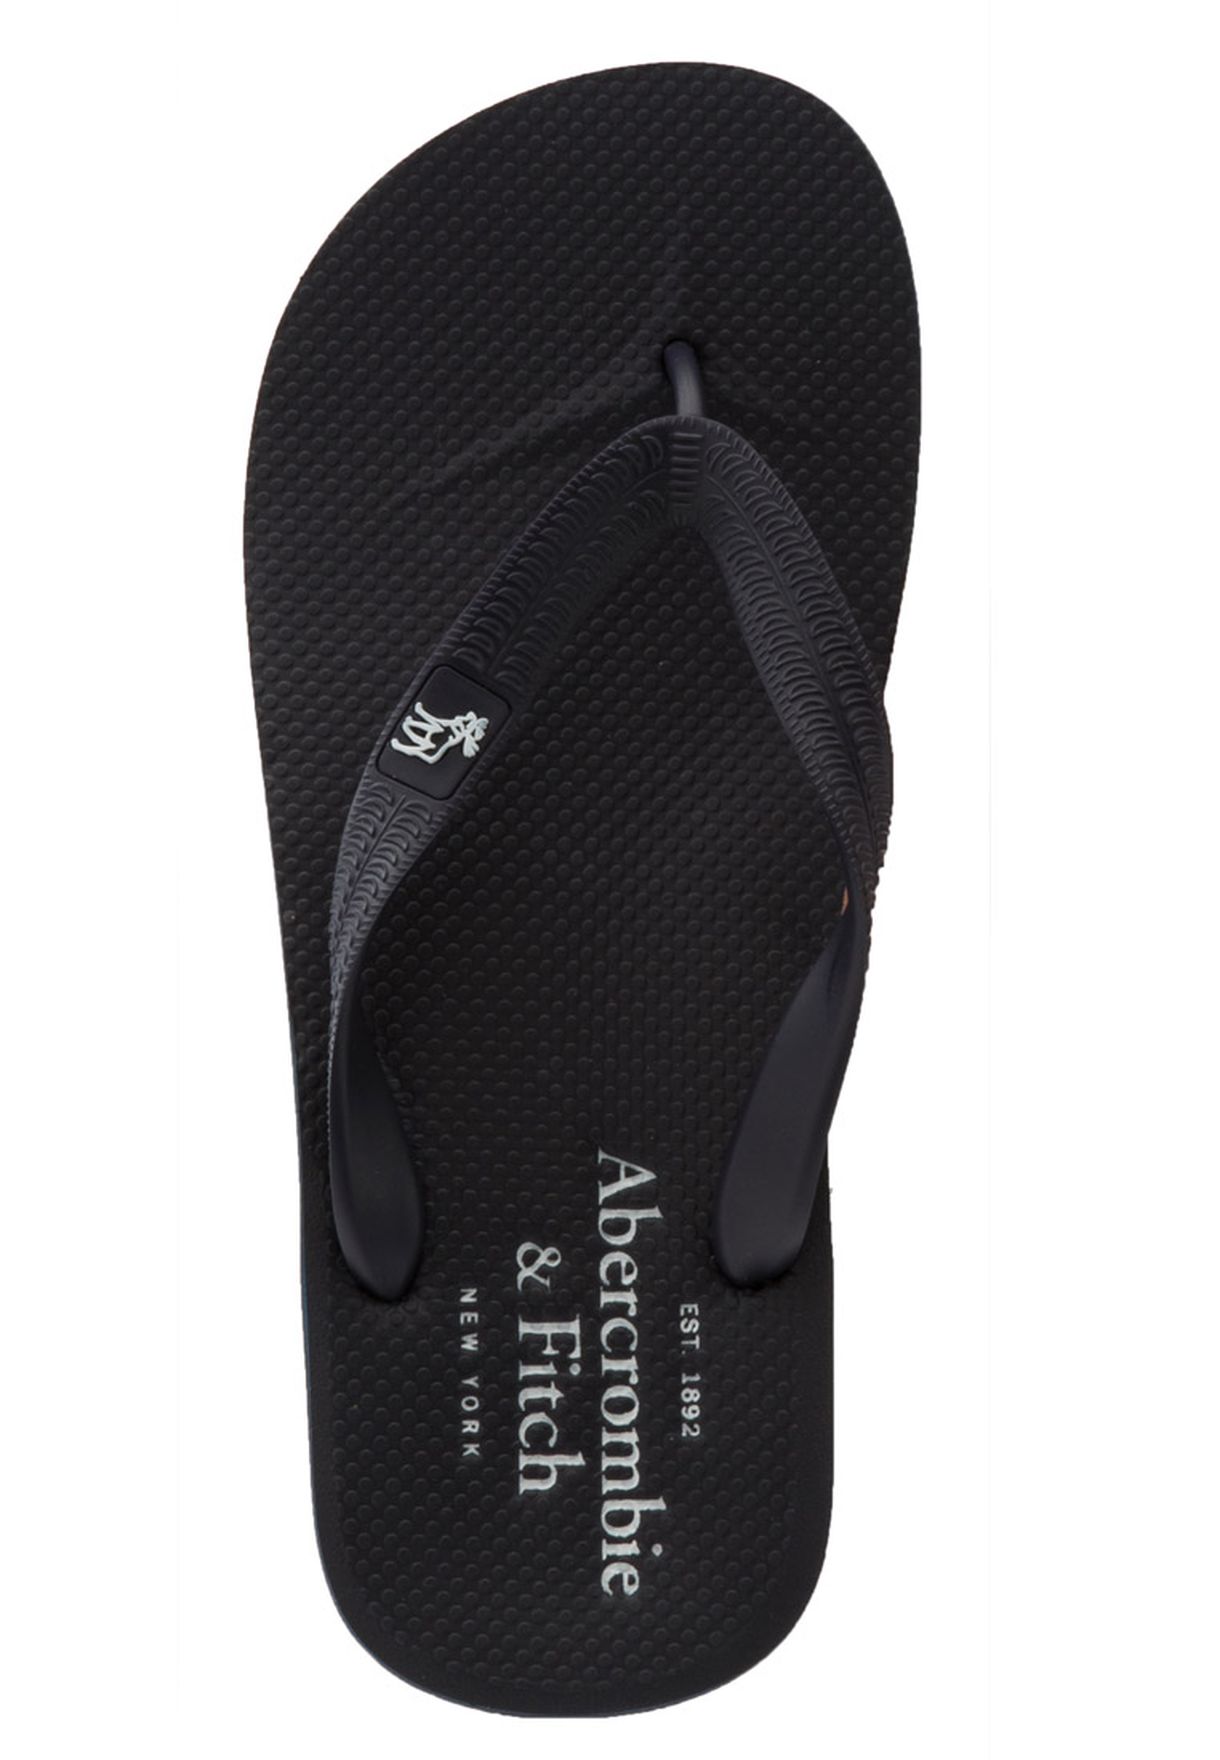 flip flops abercrombie and fitch